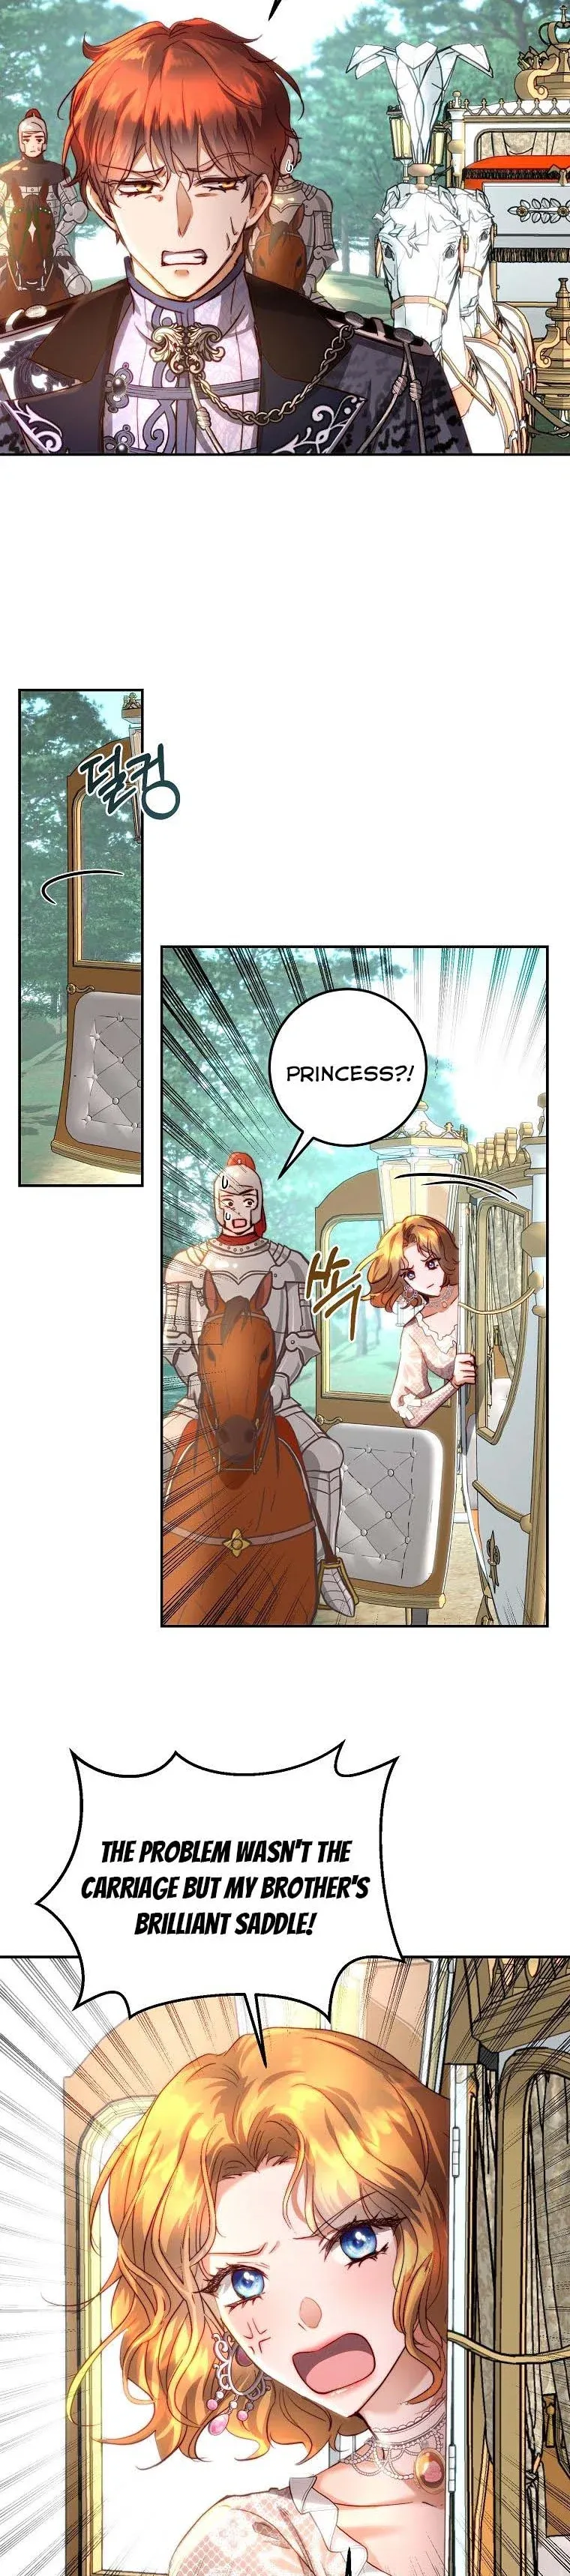 The Princess Blooms as a Crazy Flower Chapter 18 page 13